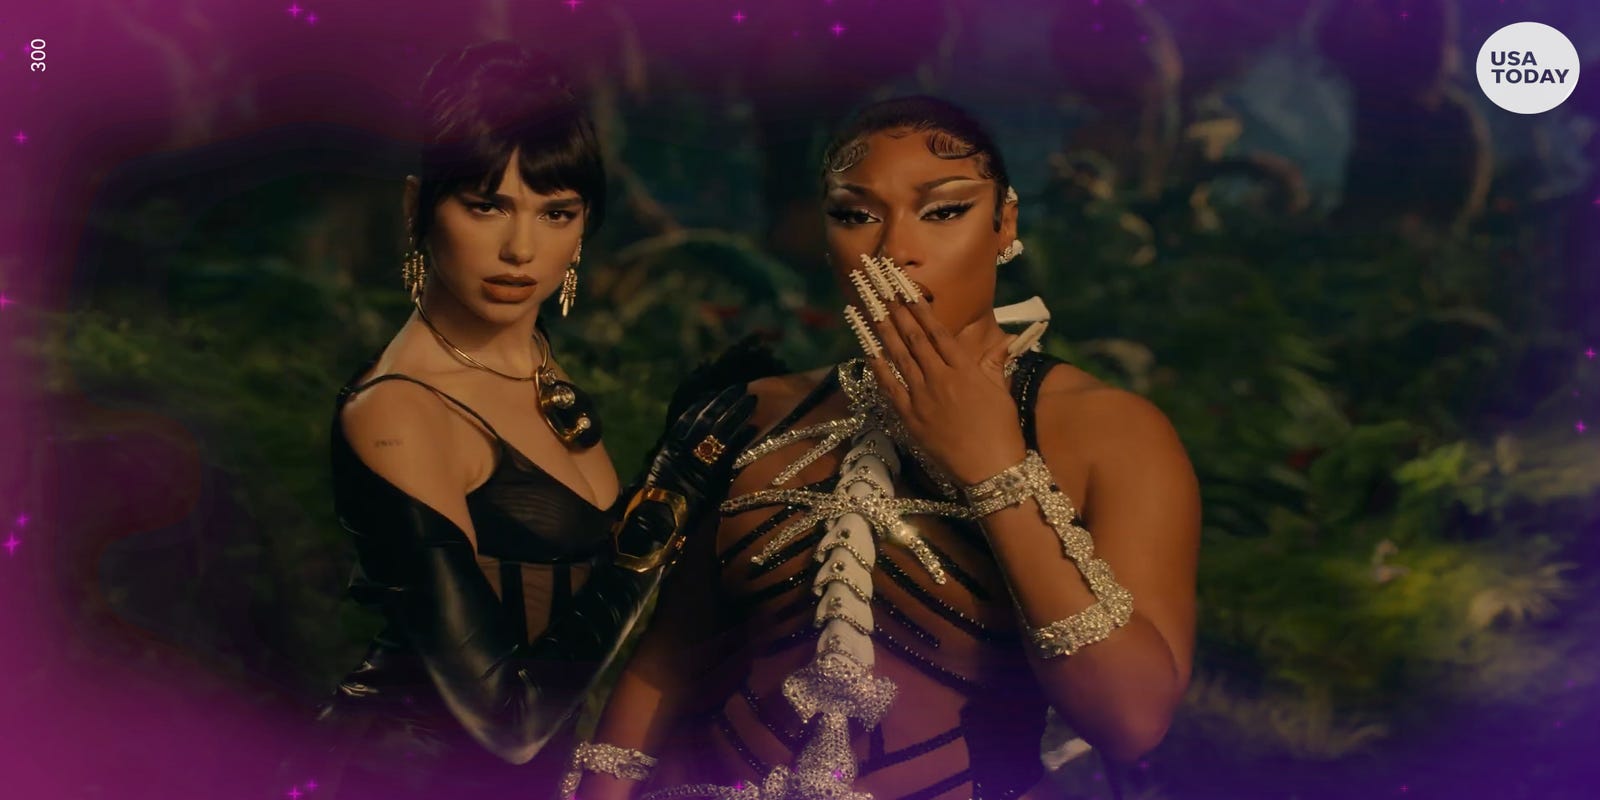 Megan Thee Stallion and Dua Lipa’s ‘Sweetest Pie’ highlights new music releases